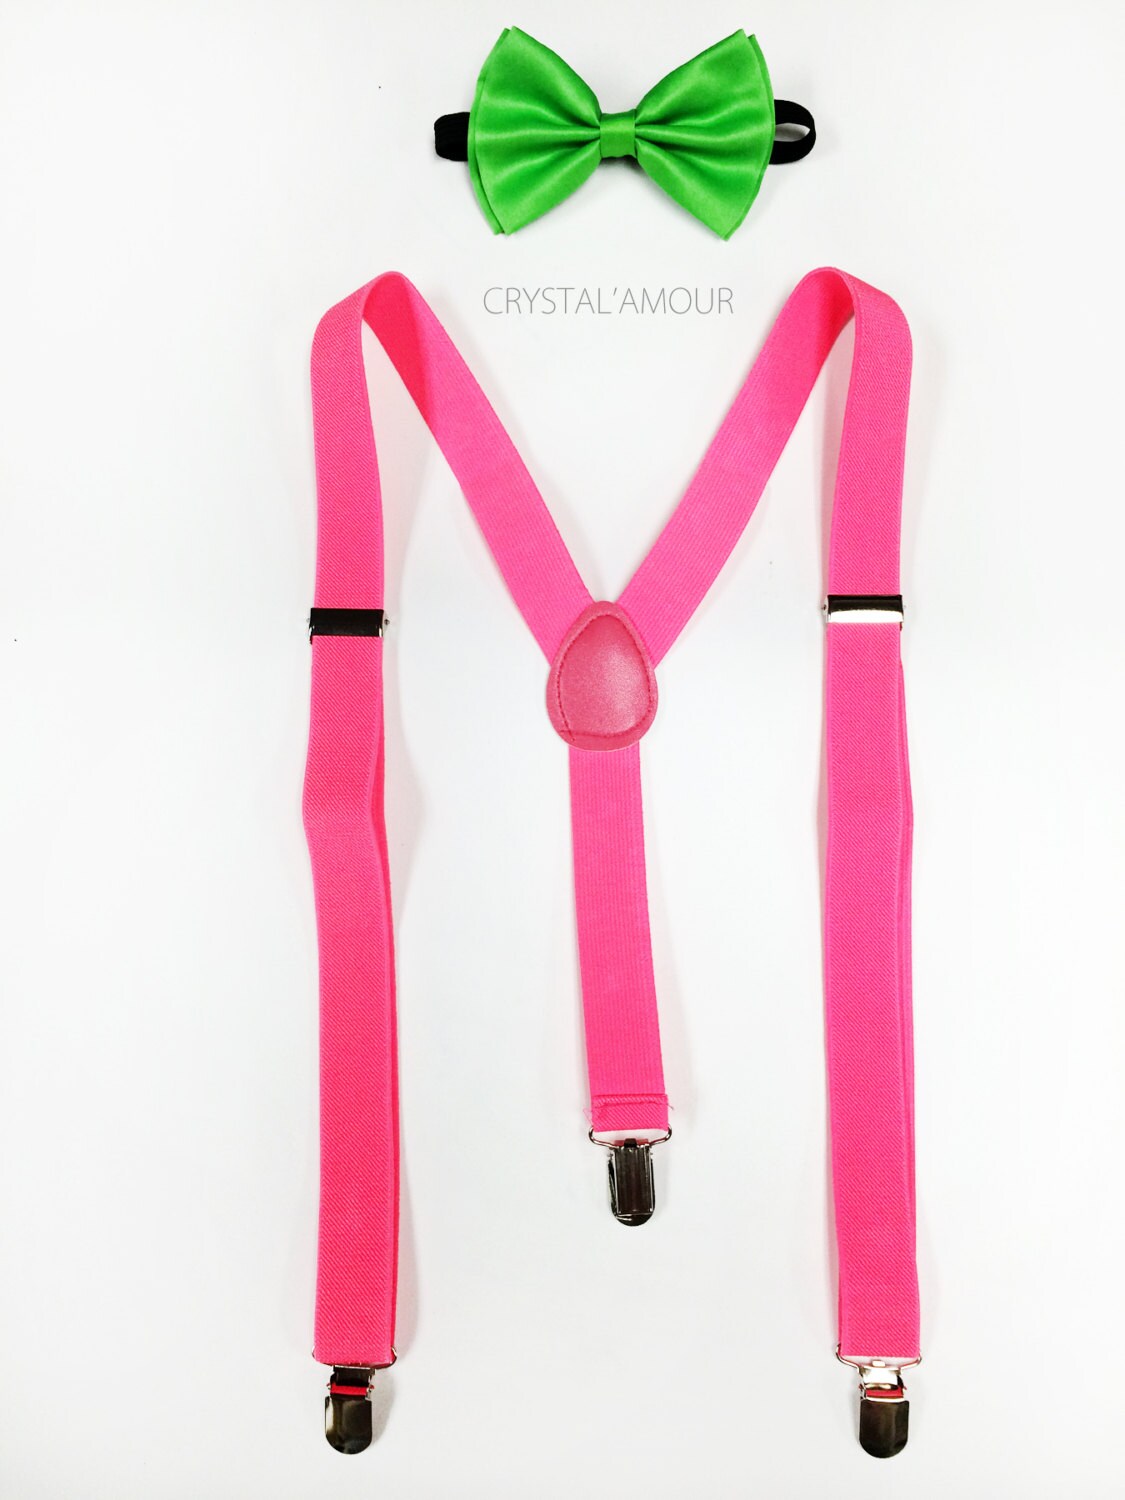 Suspender and Bow Tie Adults Men Neon Lime Green Wedding Formal Wear Accessories 